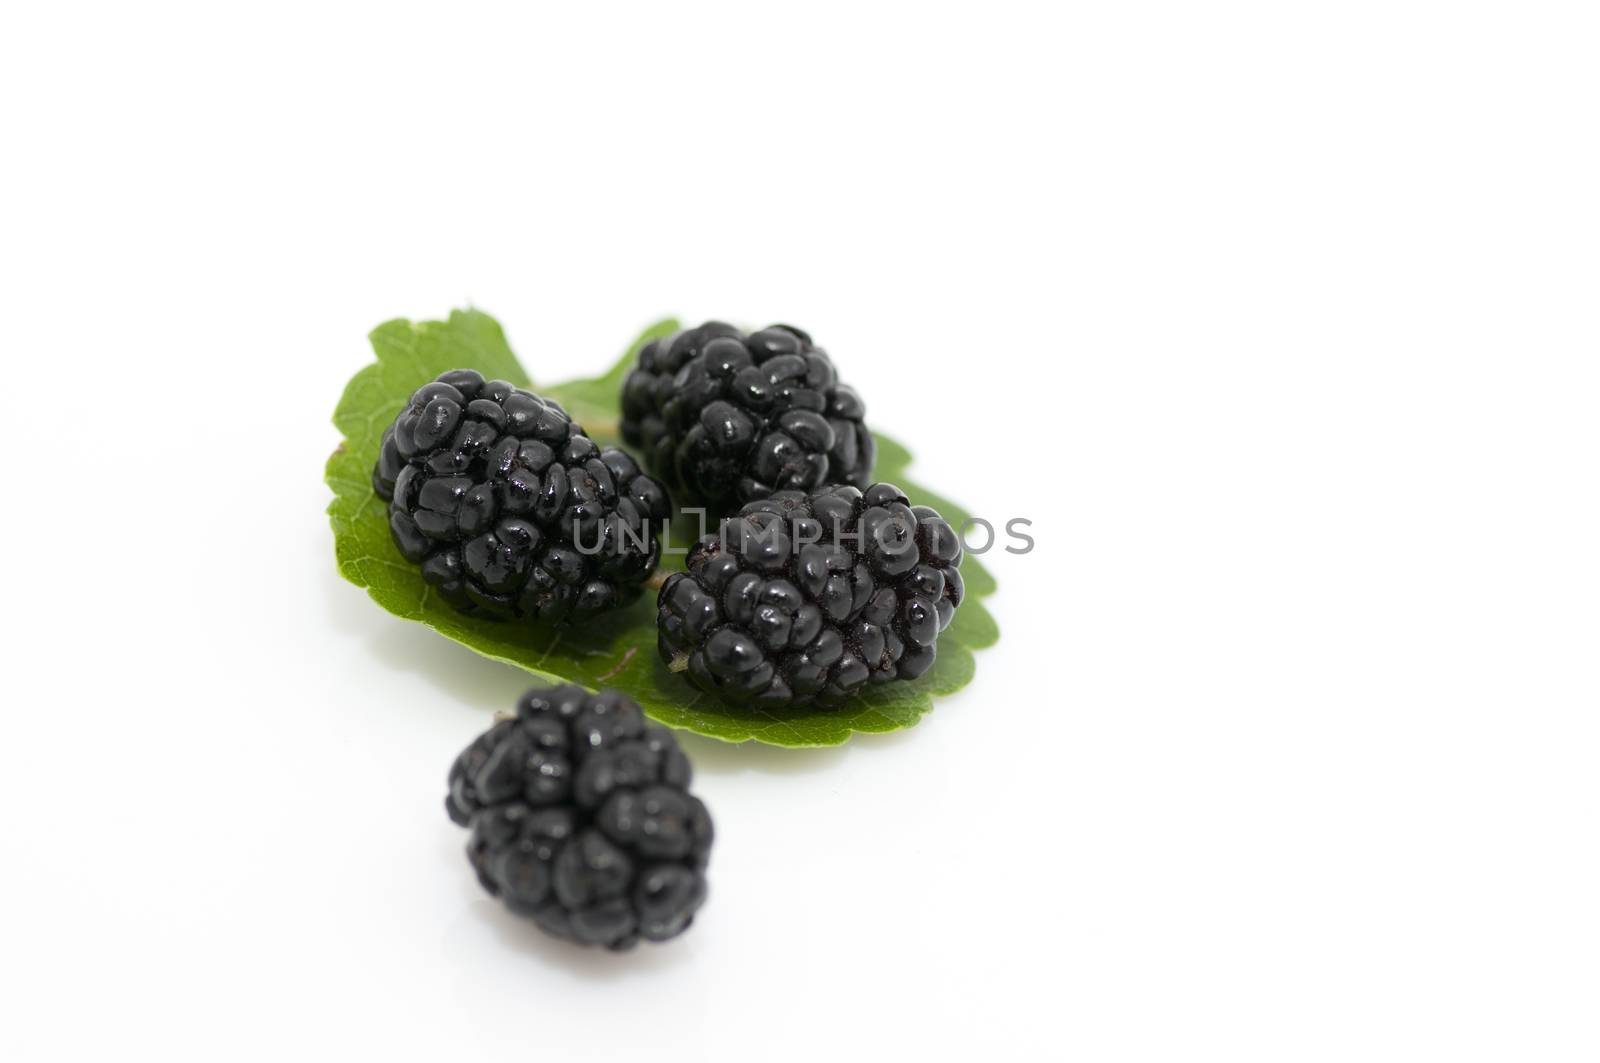 Ripe organic mulberries by dred